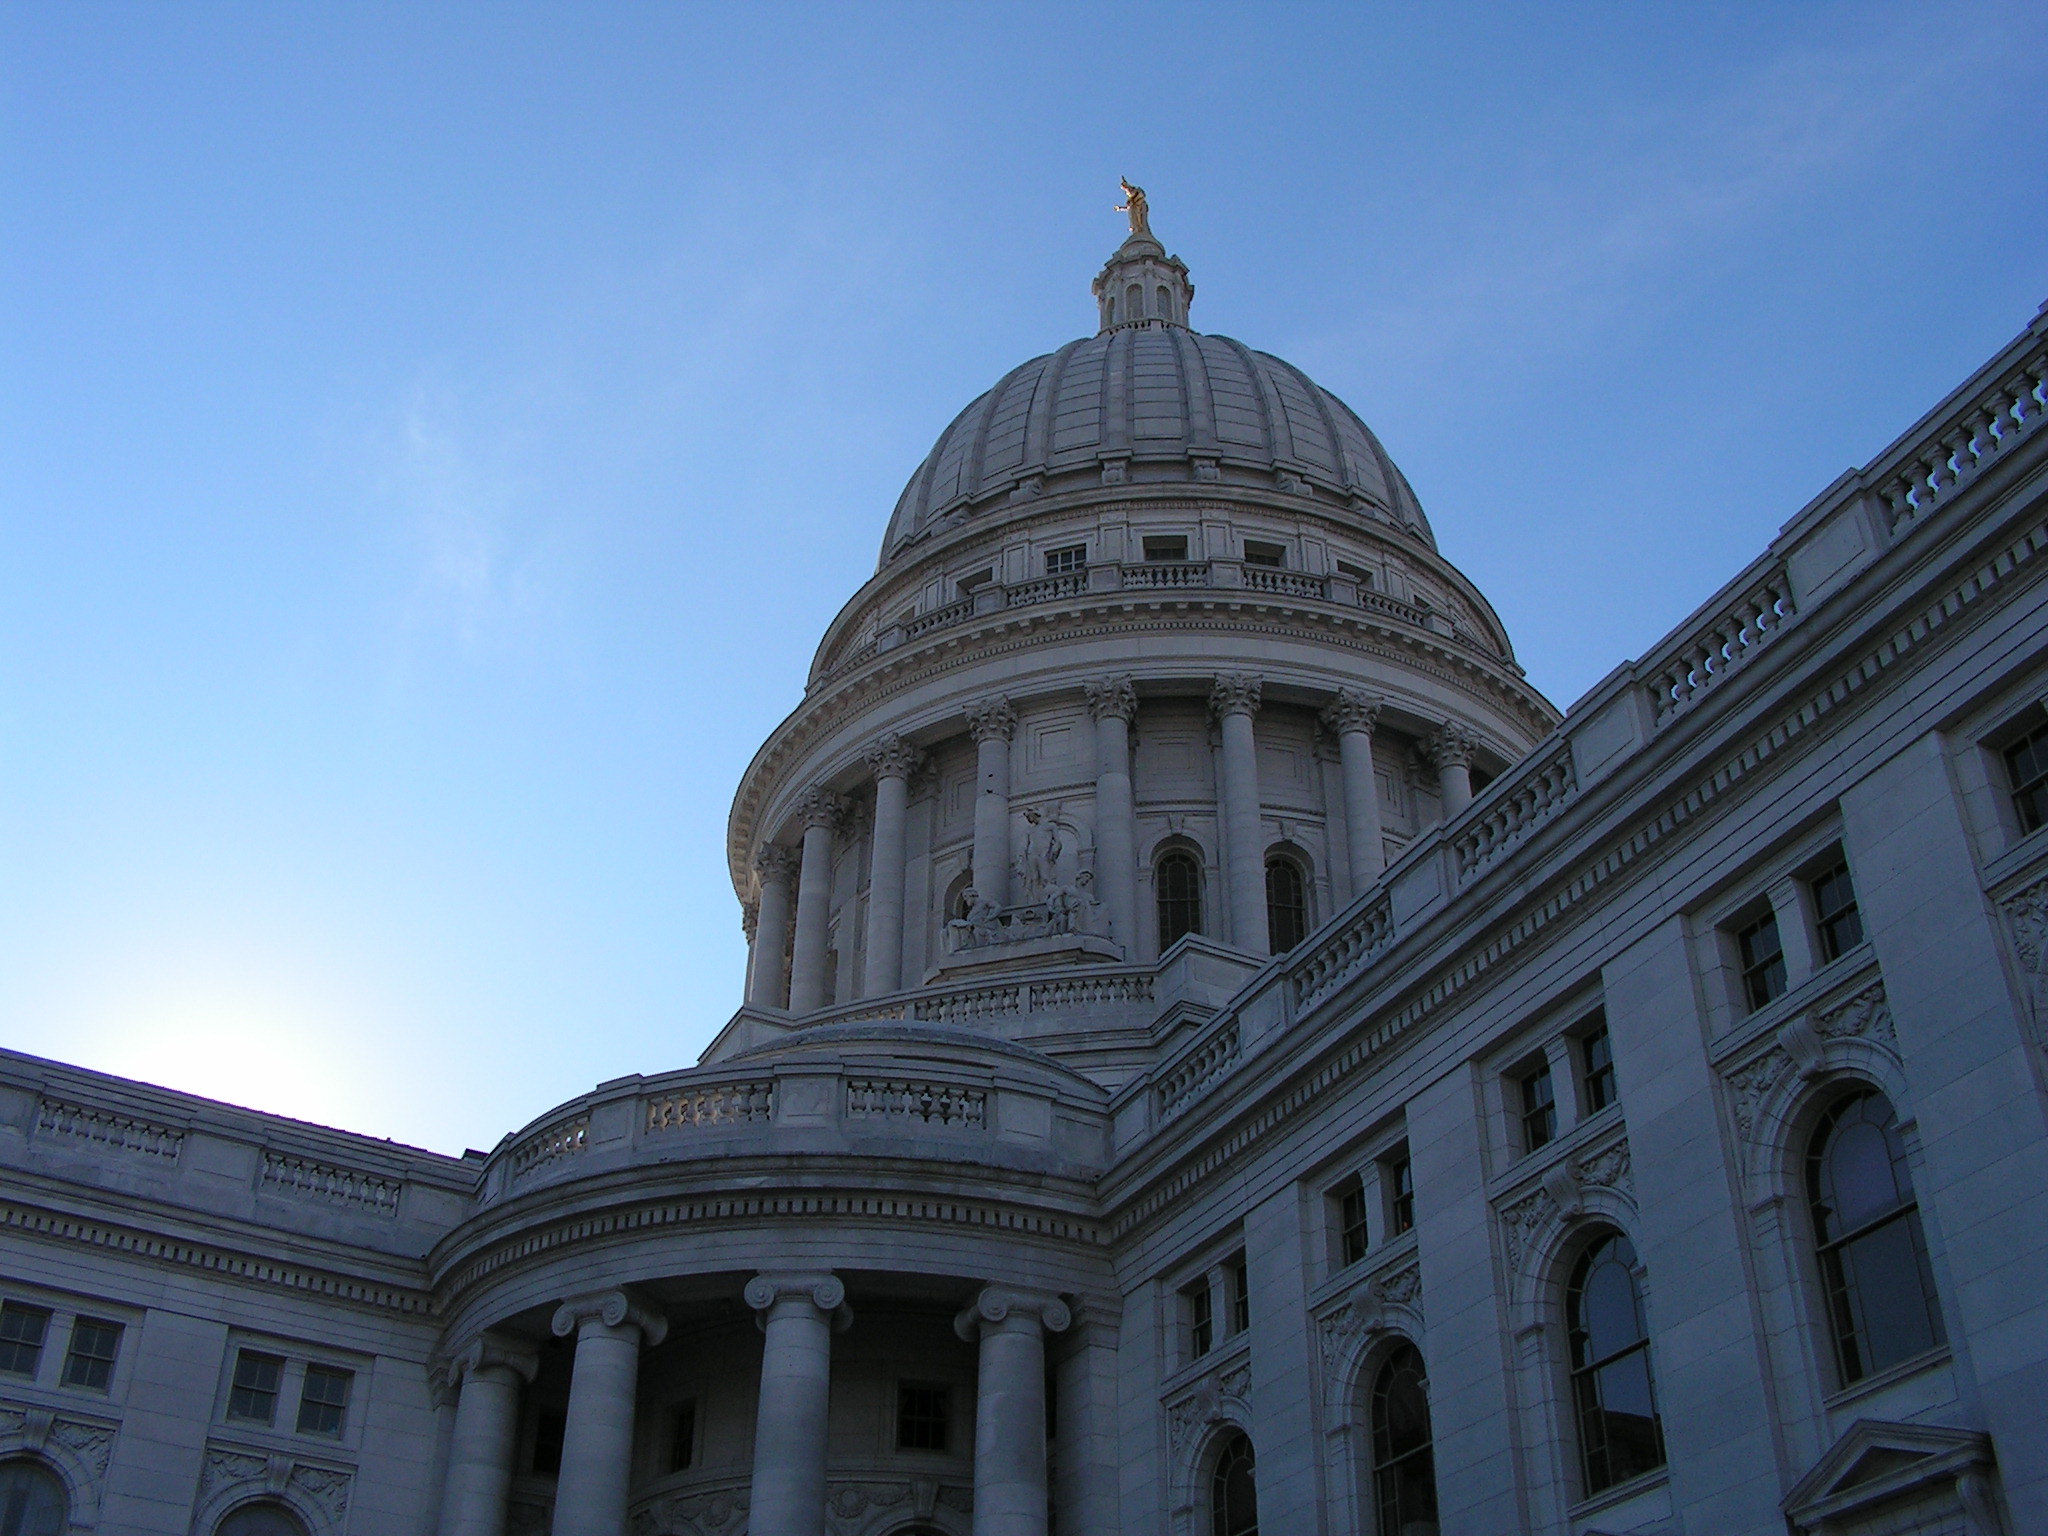 The Wisconsin Capitol building